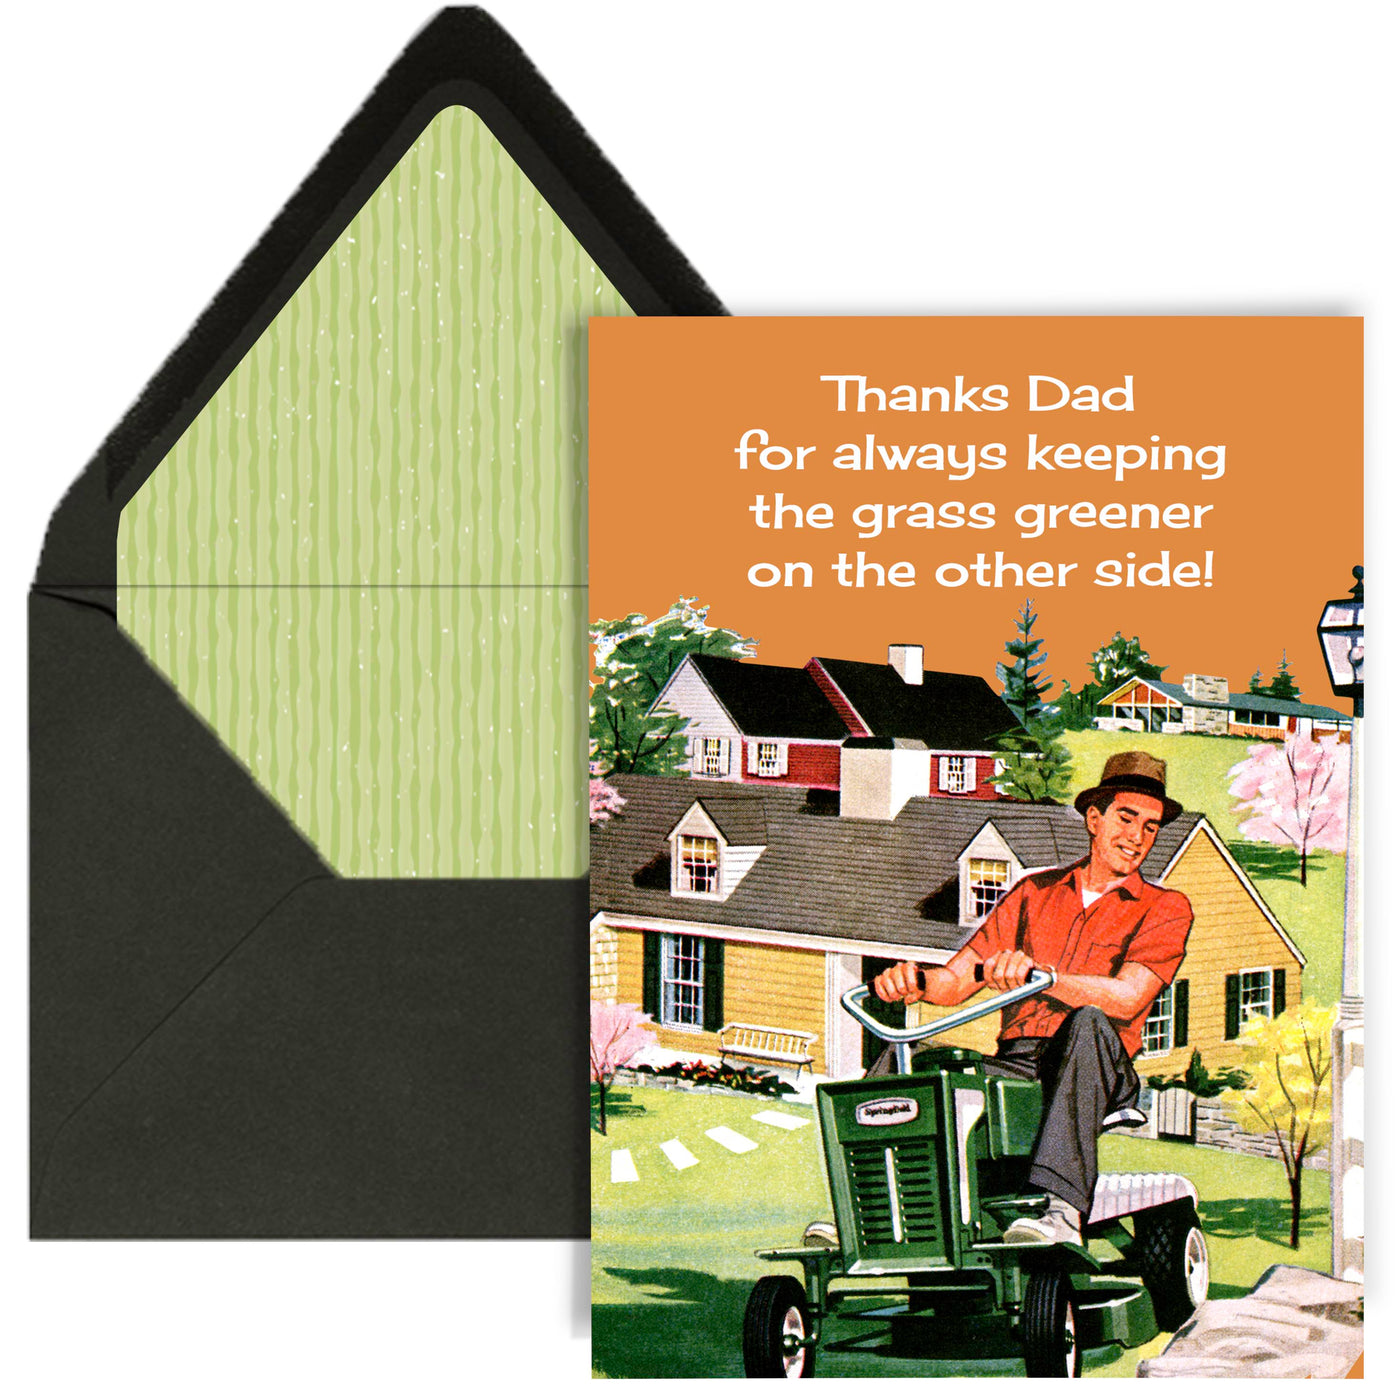 Grass Greener on the Other Side Lawnmower Card for outdoor Dad